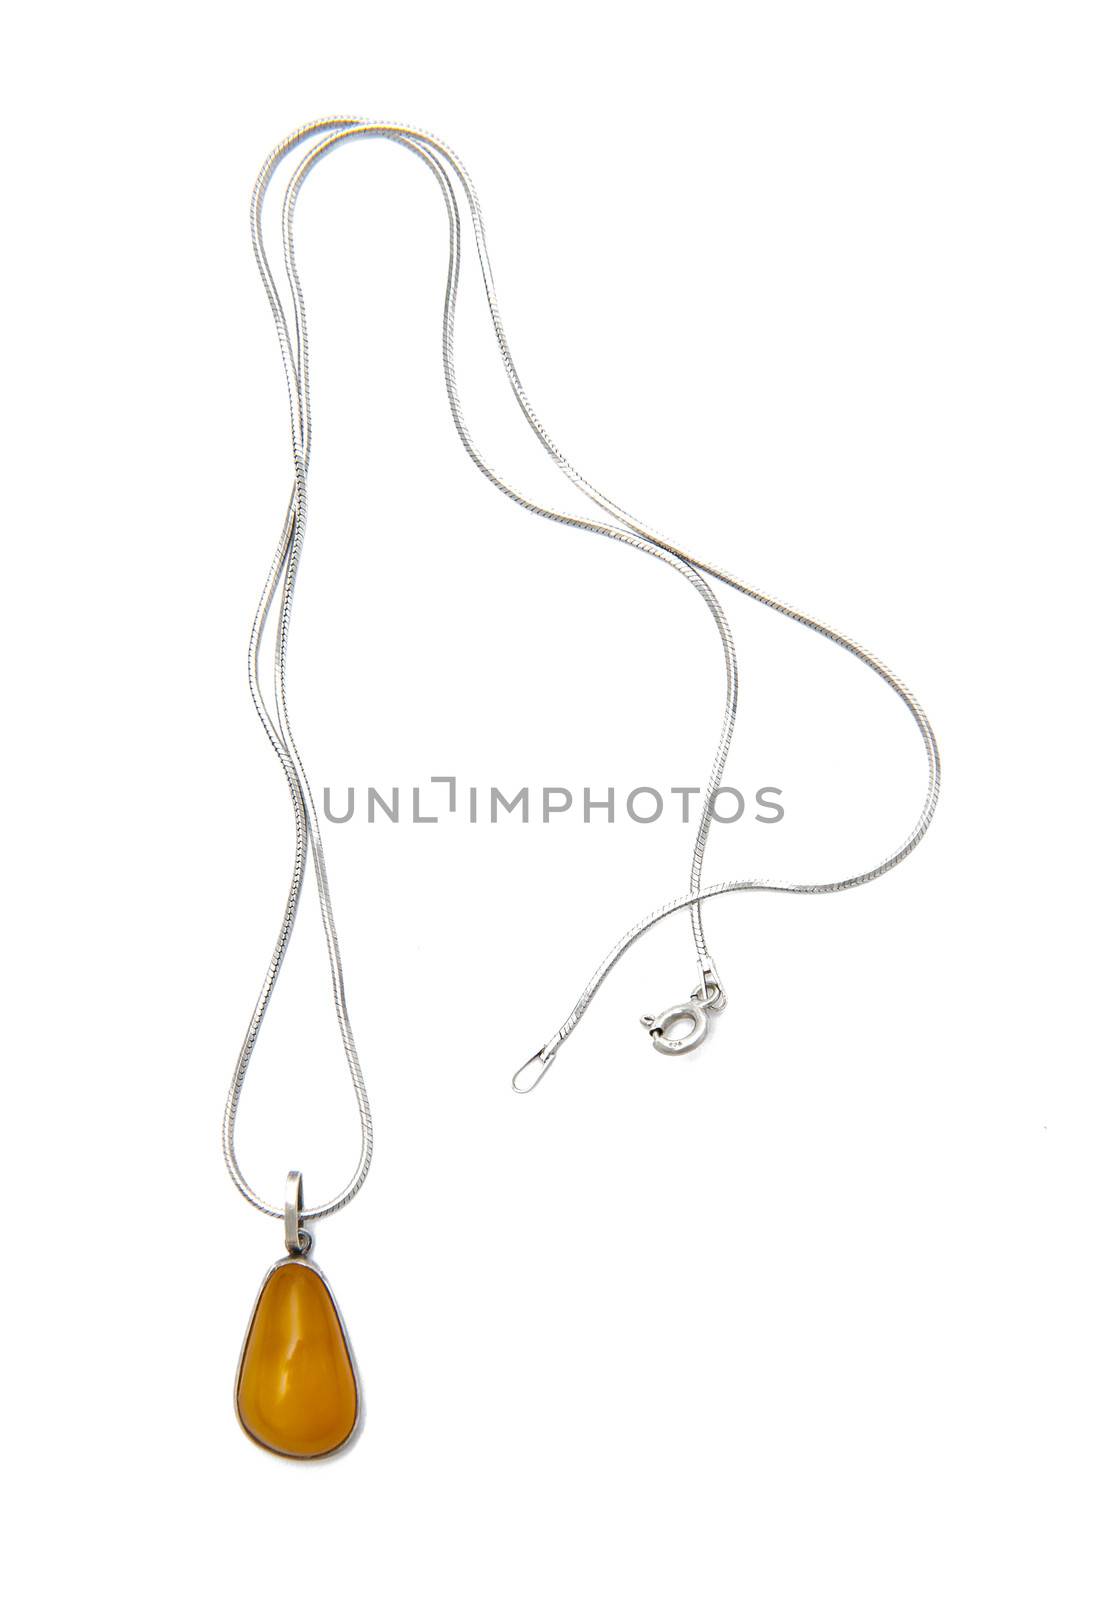 Necklace isolated on the white background